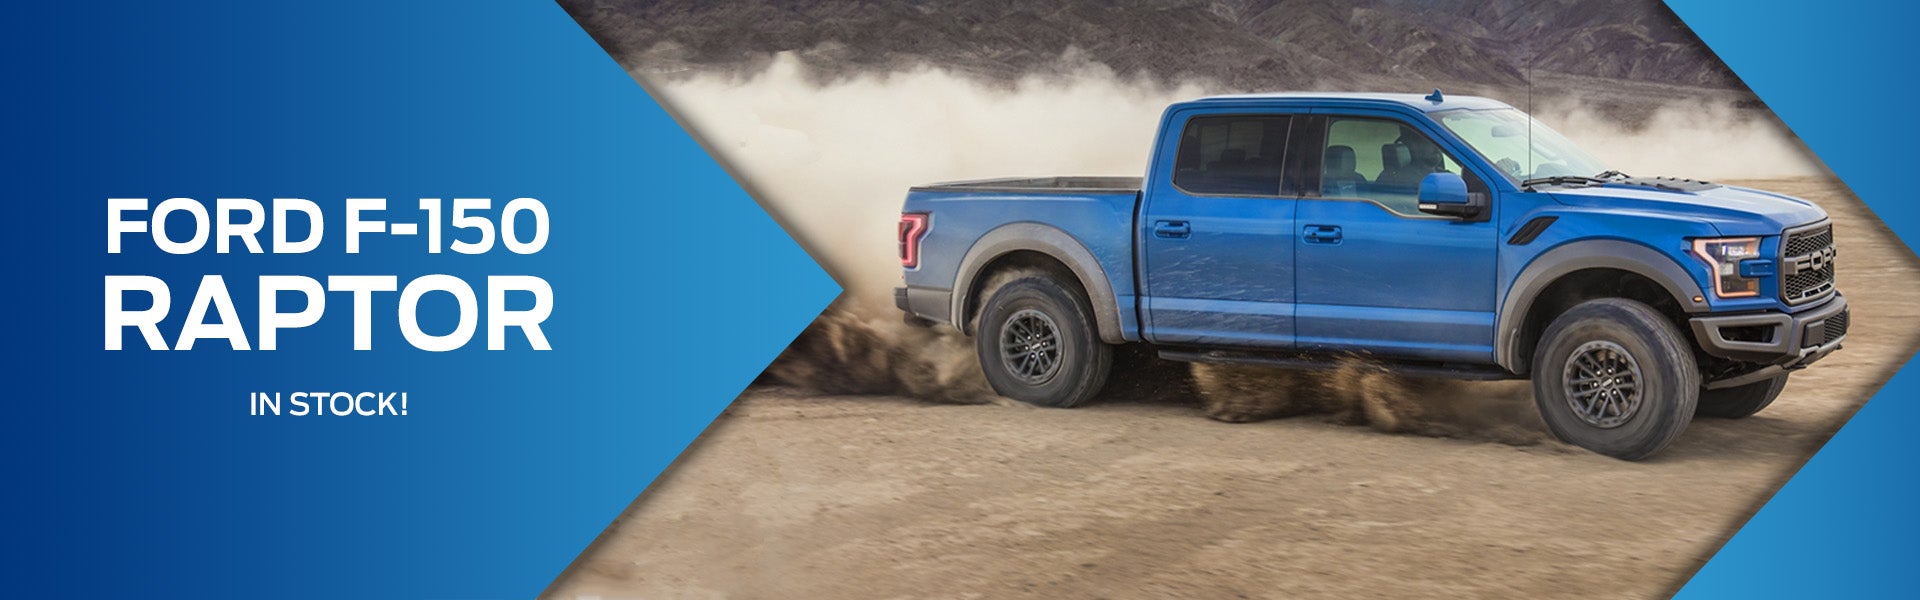 Ford F-150 Raptor In Stock at McMahon Ford